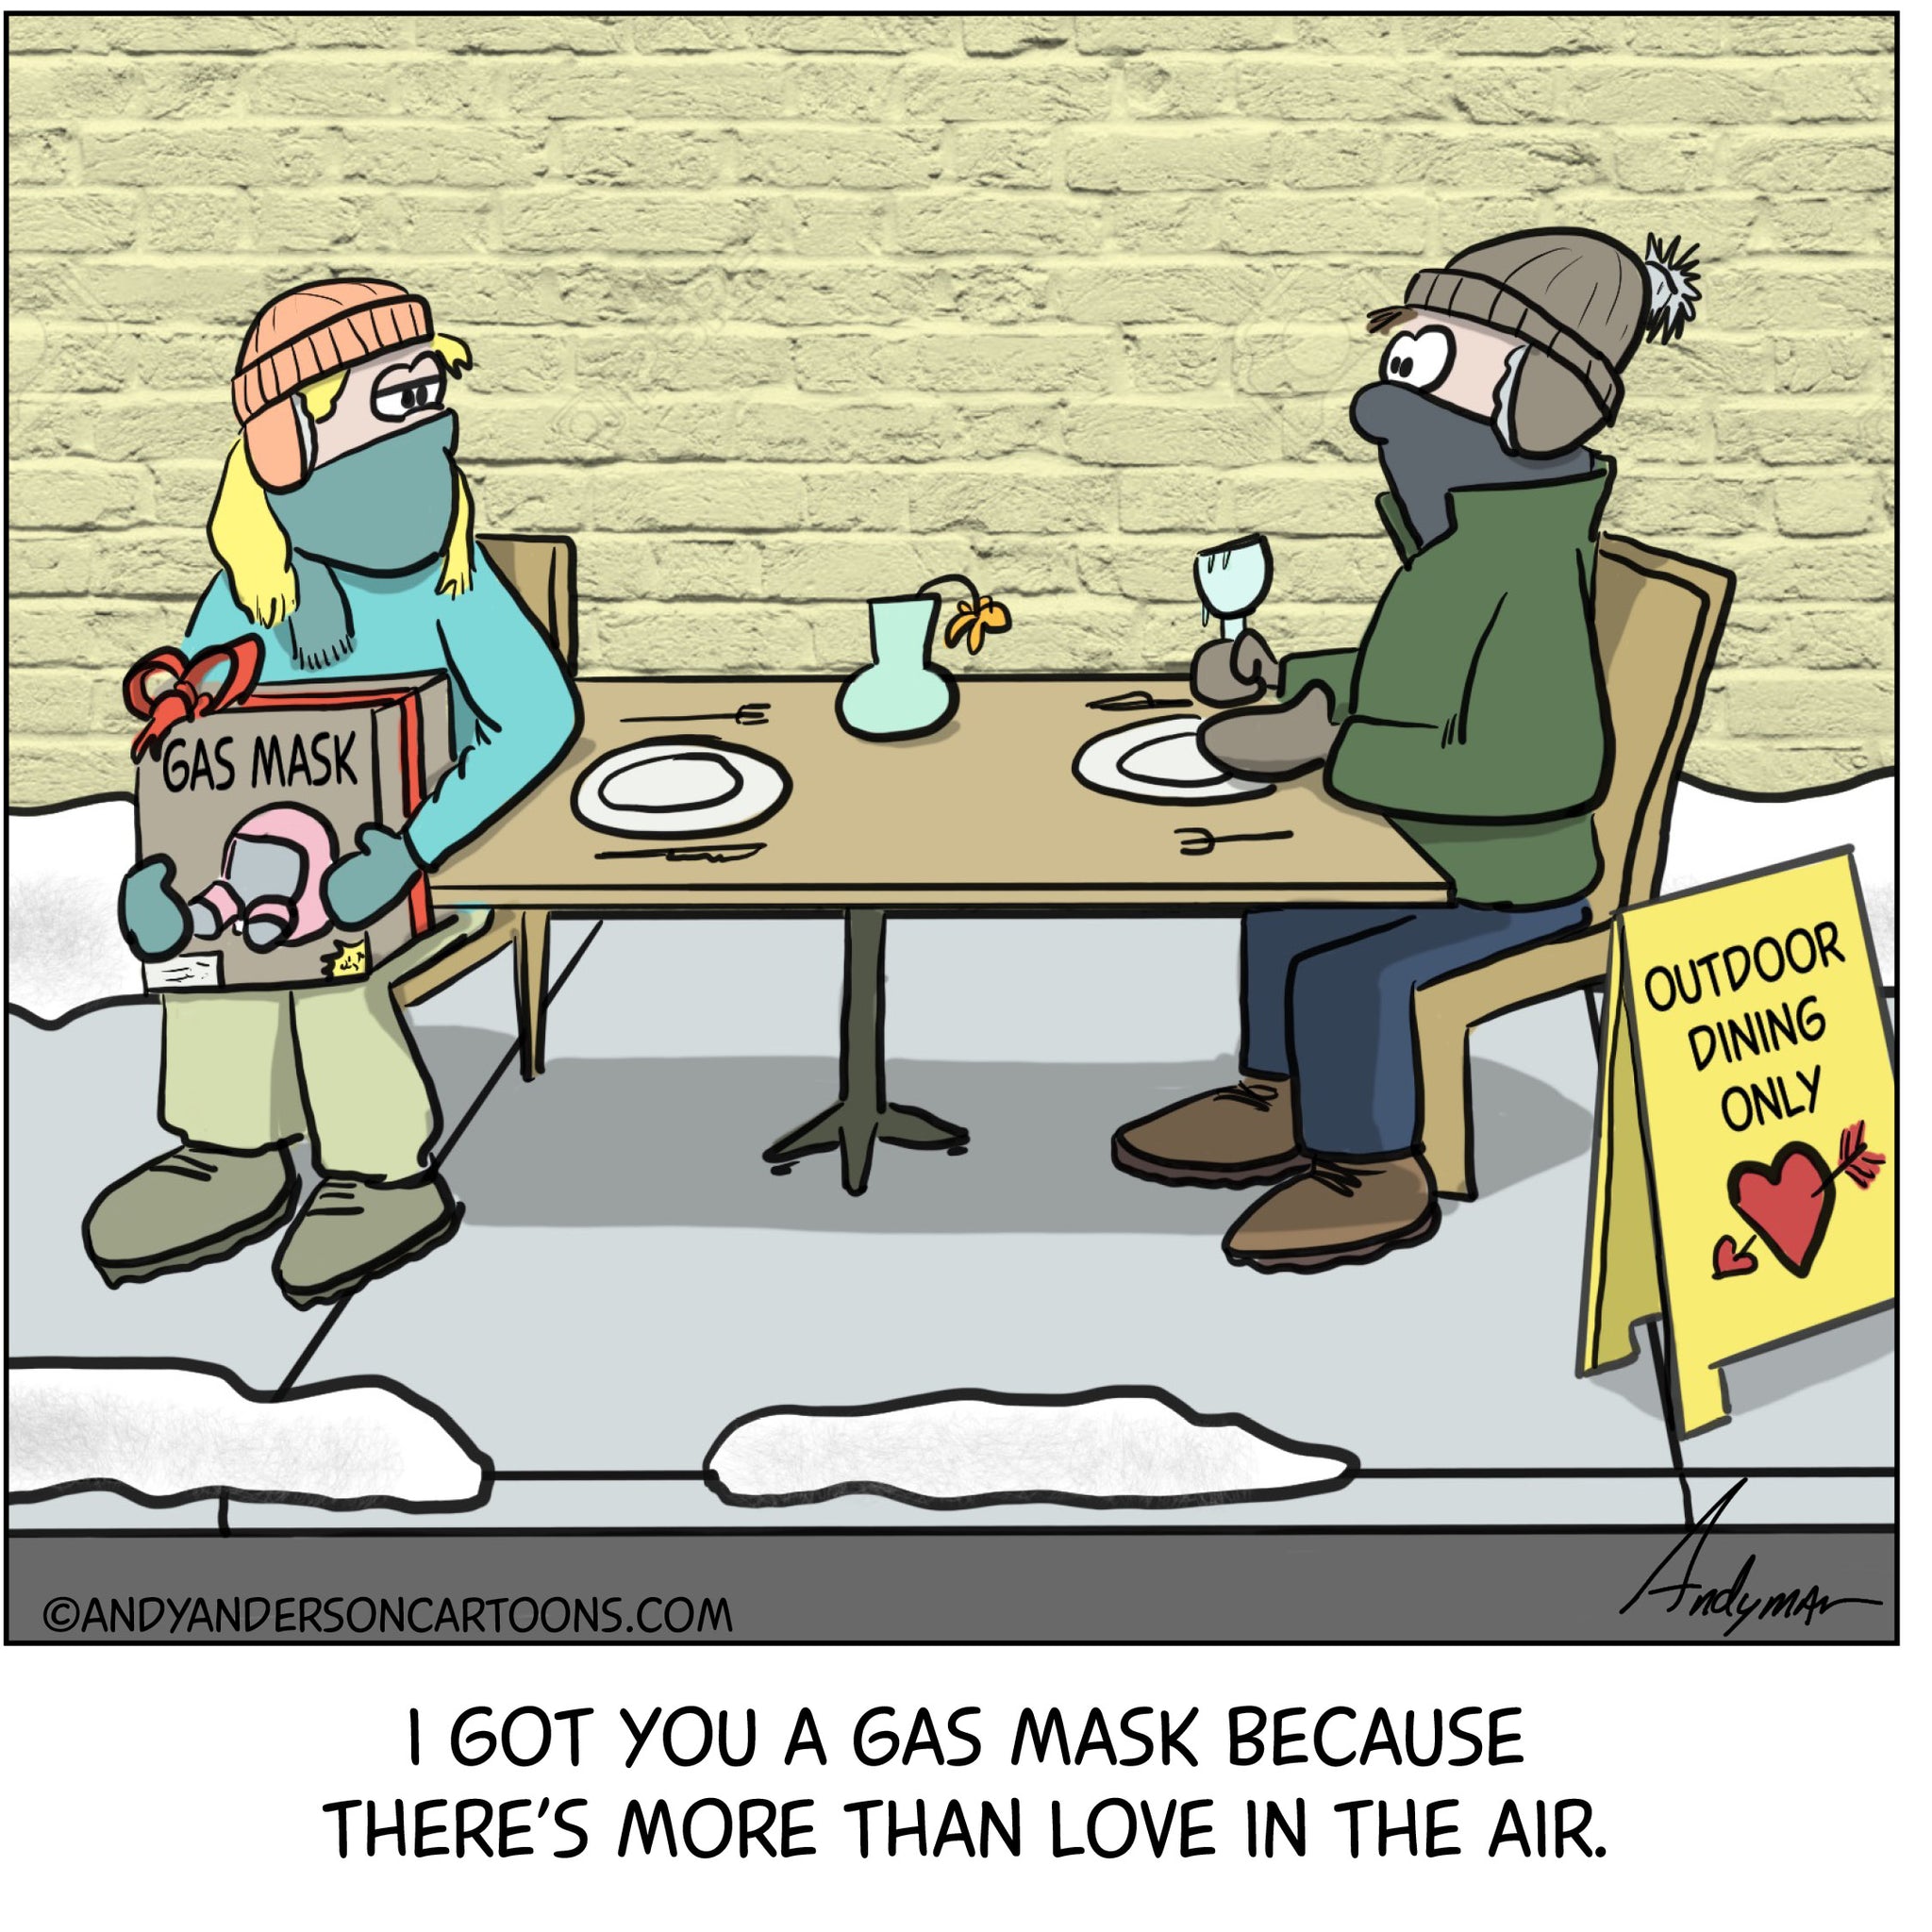 Valentine's Day 2021 cartoon about getting a gas mask because of COVID